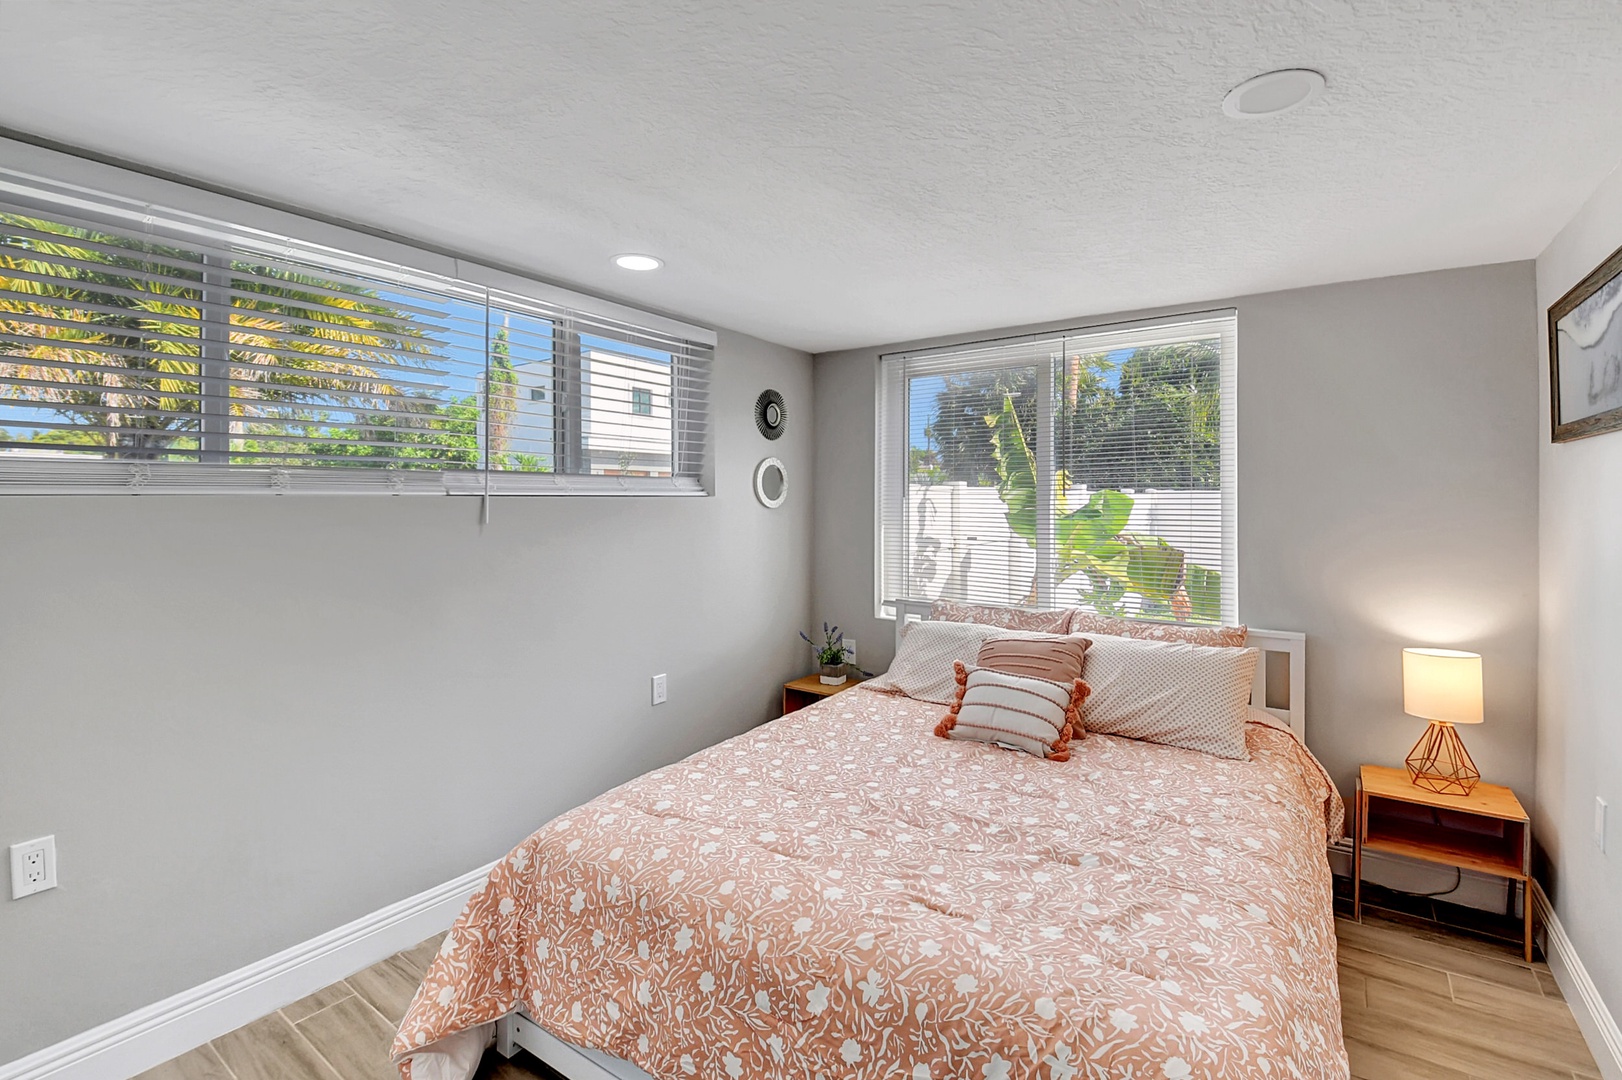 The final bedroom offers a comfortable queen bed & ample closet space